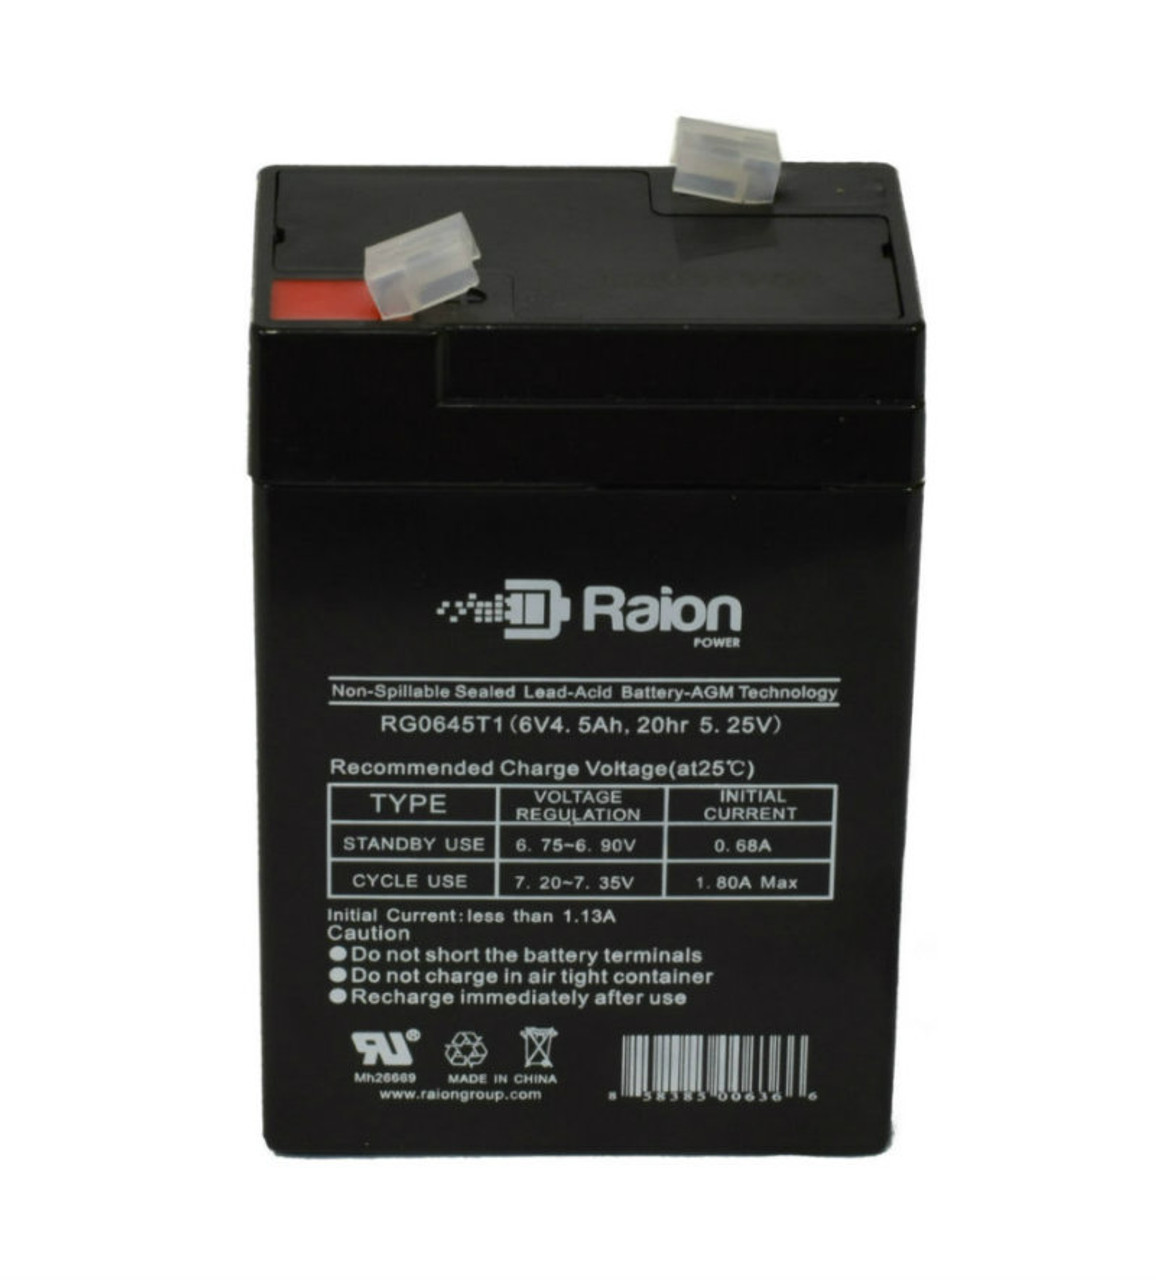 Raion Power RG0645T1 Replacement Battery Cartridge for Technacell EP640